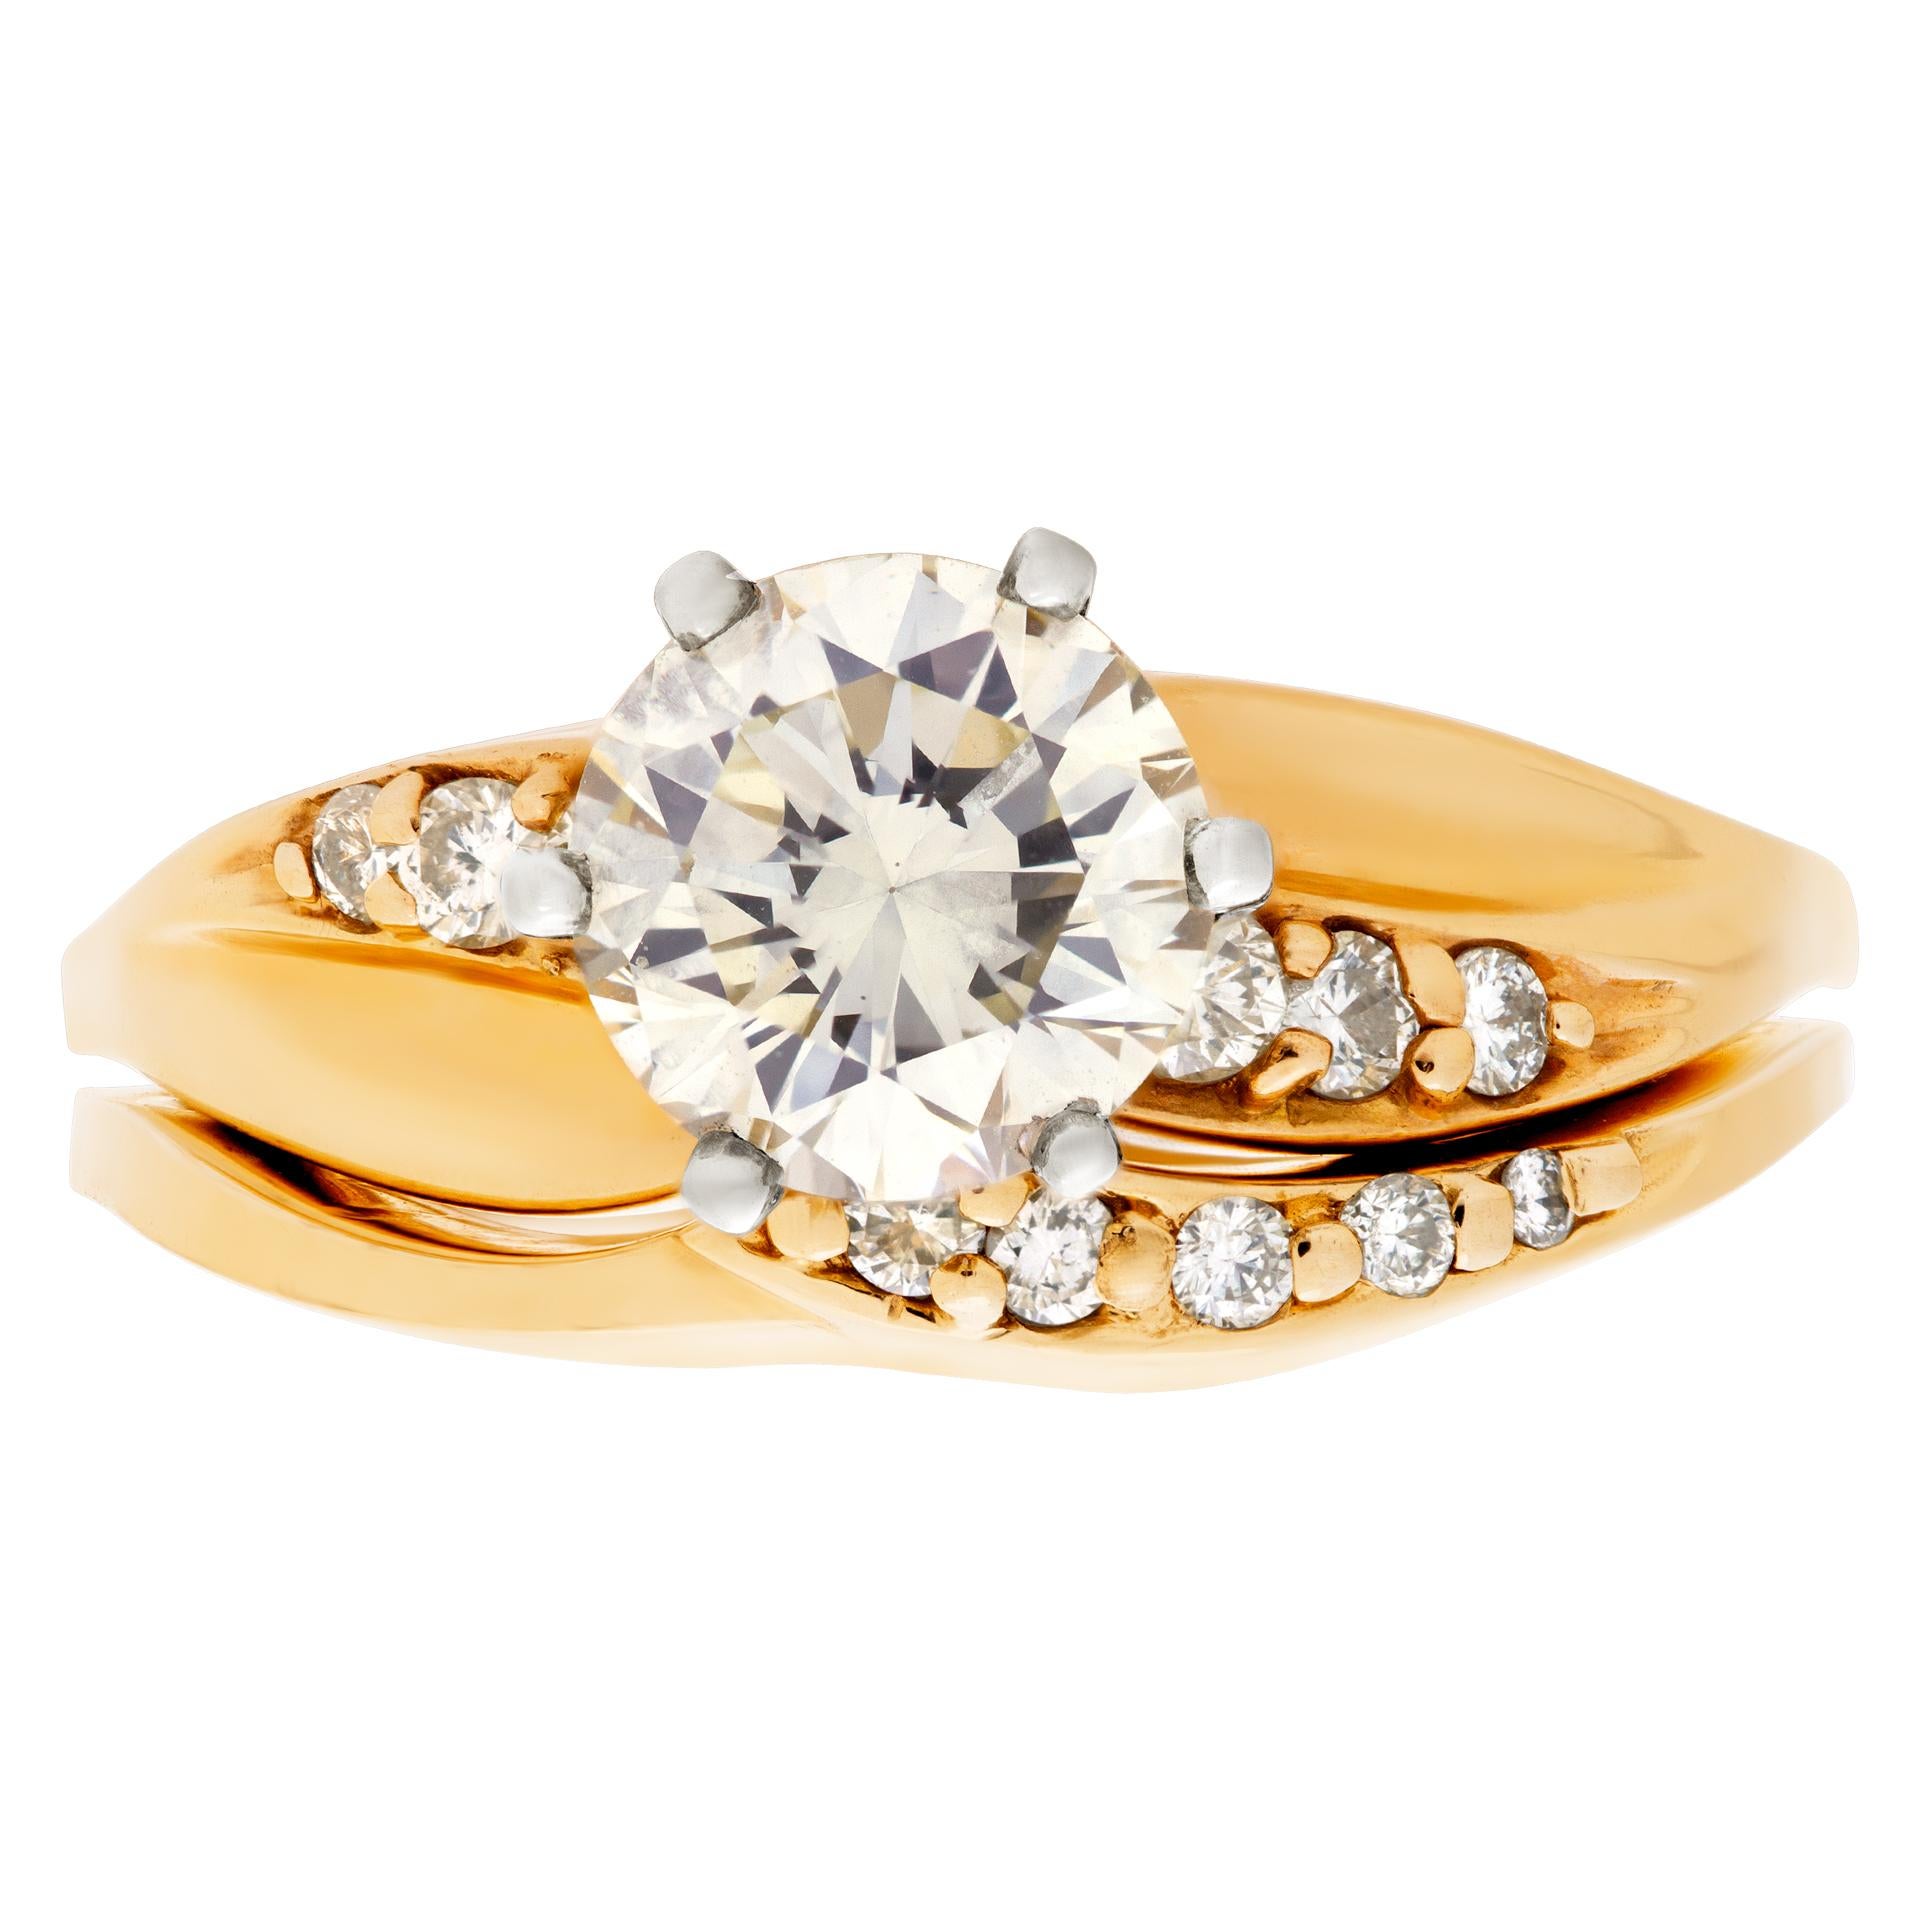 GIA certified round brilliant cut diamond 1.05 carat (W-X Color, VS-1 Clarity) ring set in a 14k yellow gold mounting with matching band with diamond accents. Size 6. This GIA certified ring is currently size 6 and some items can be sized up or